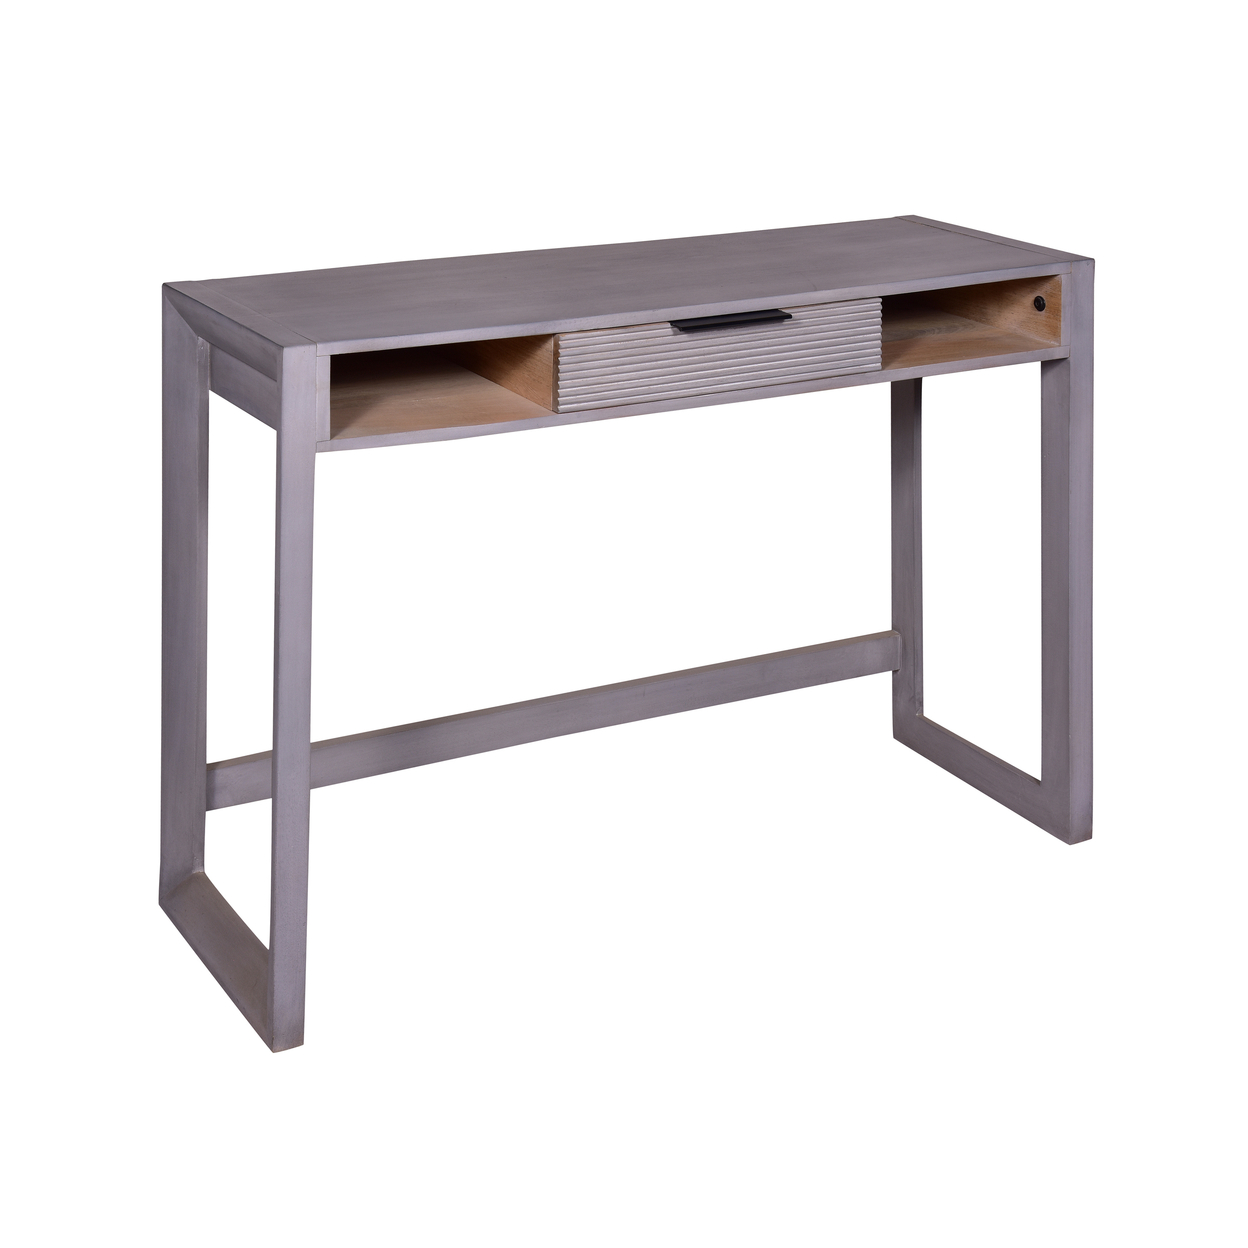 44 Inch Mango Wood Desk Minimalistic Entryway Console Table, Single Drawer, Textured Groove Lines, Gray- Saltoro Sherpi